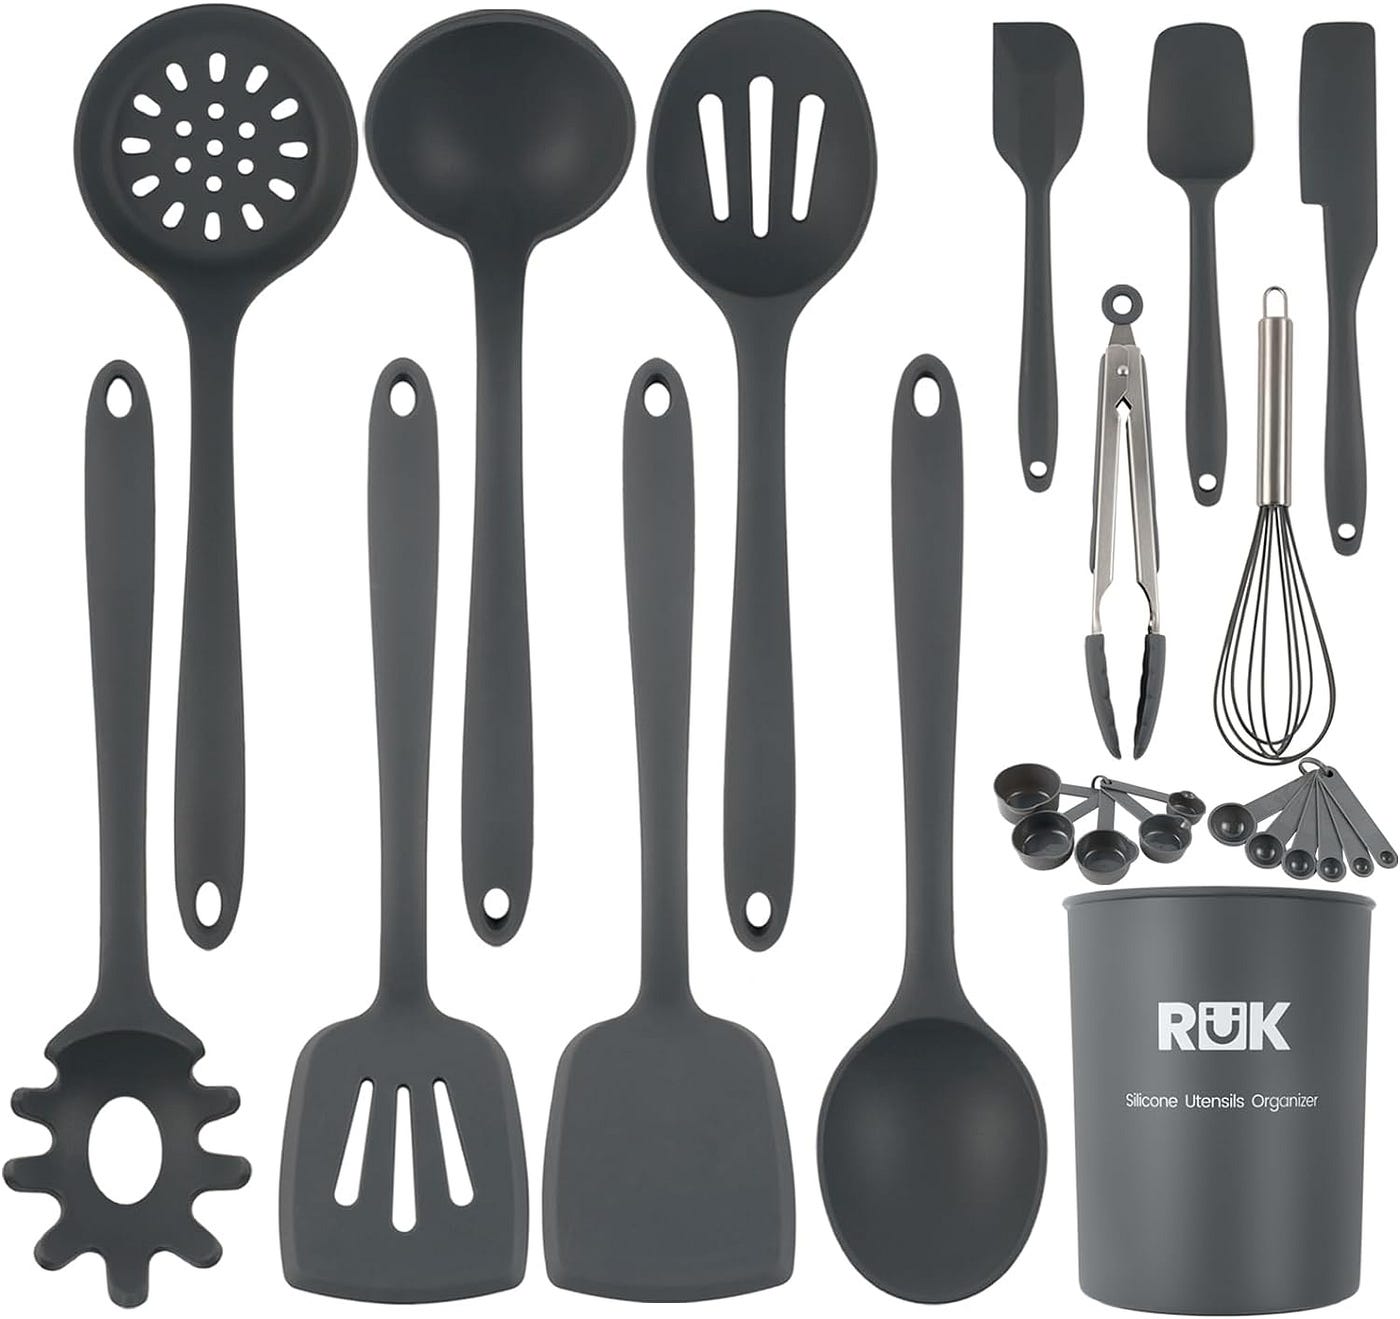 Stainless Steel Kitchen Utensil Set, Standcn 9 PCS Cooking